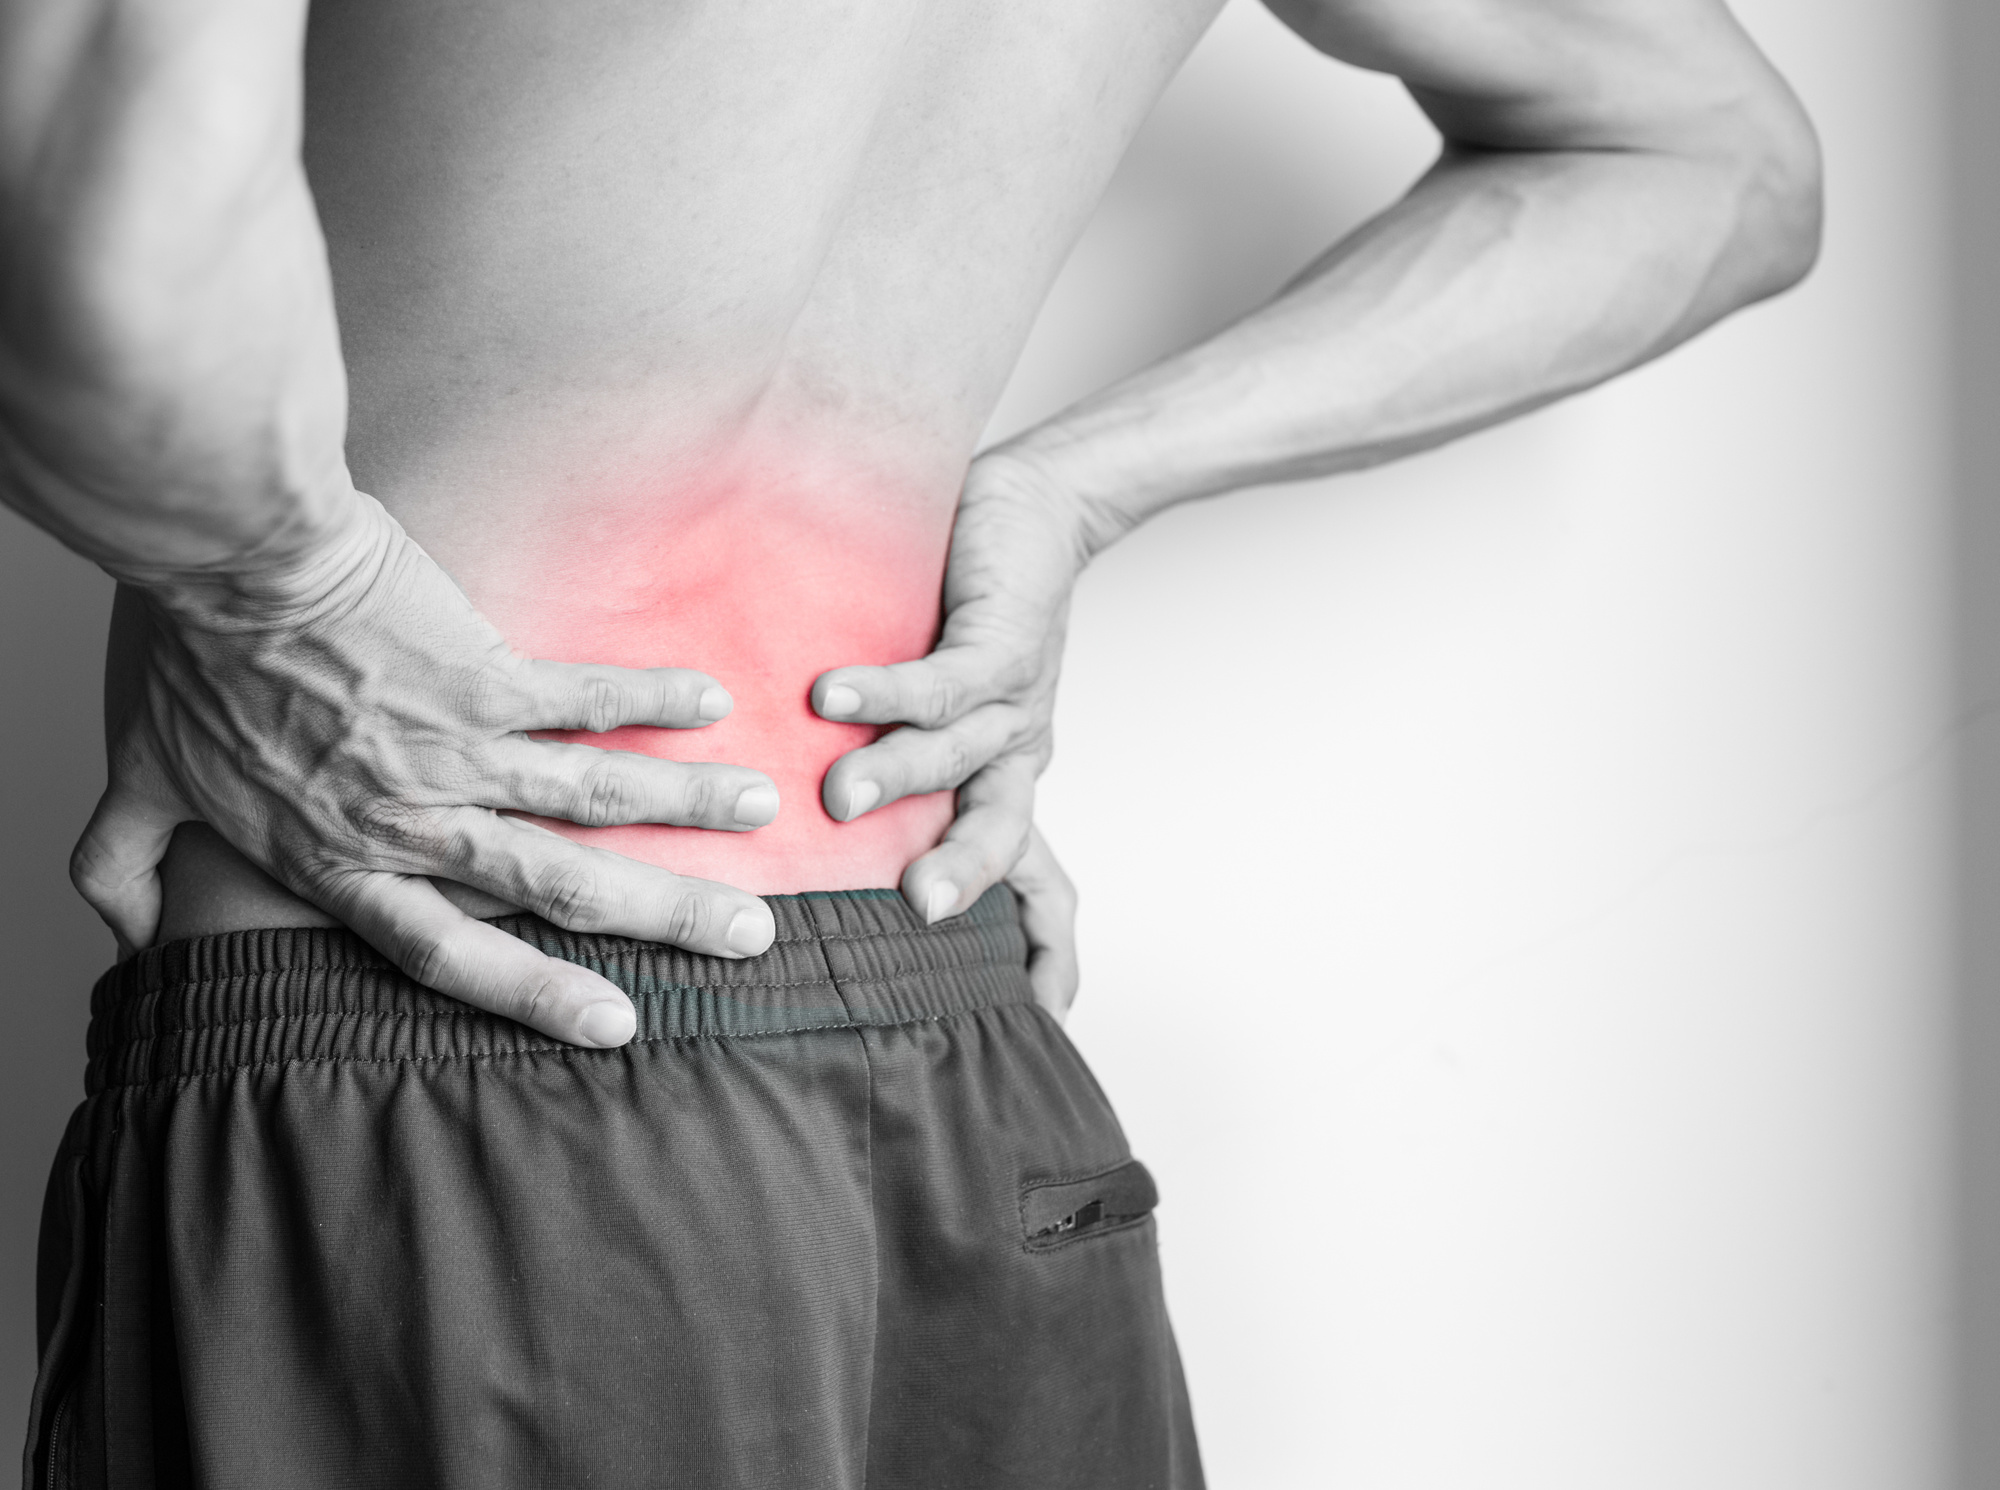 how to get rid of back pain fast